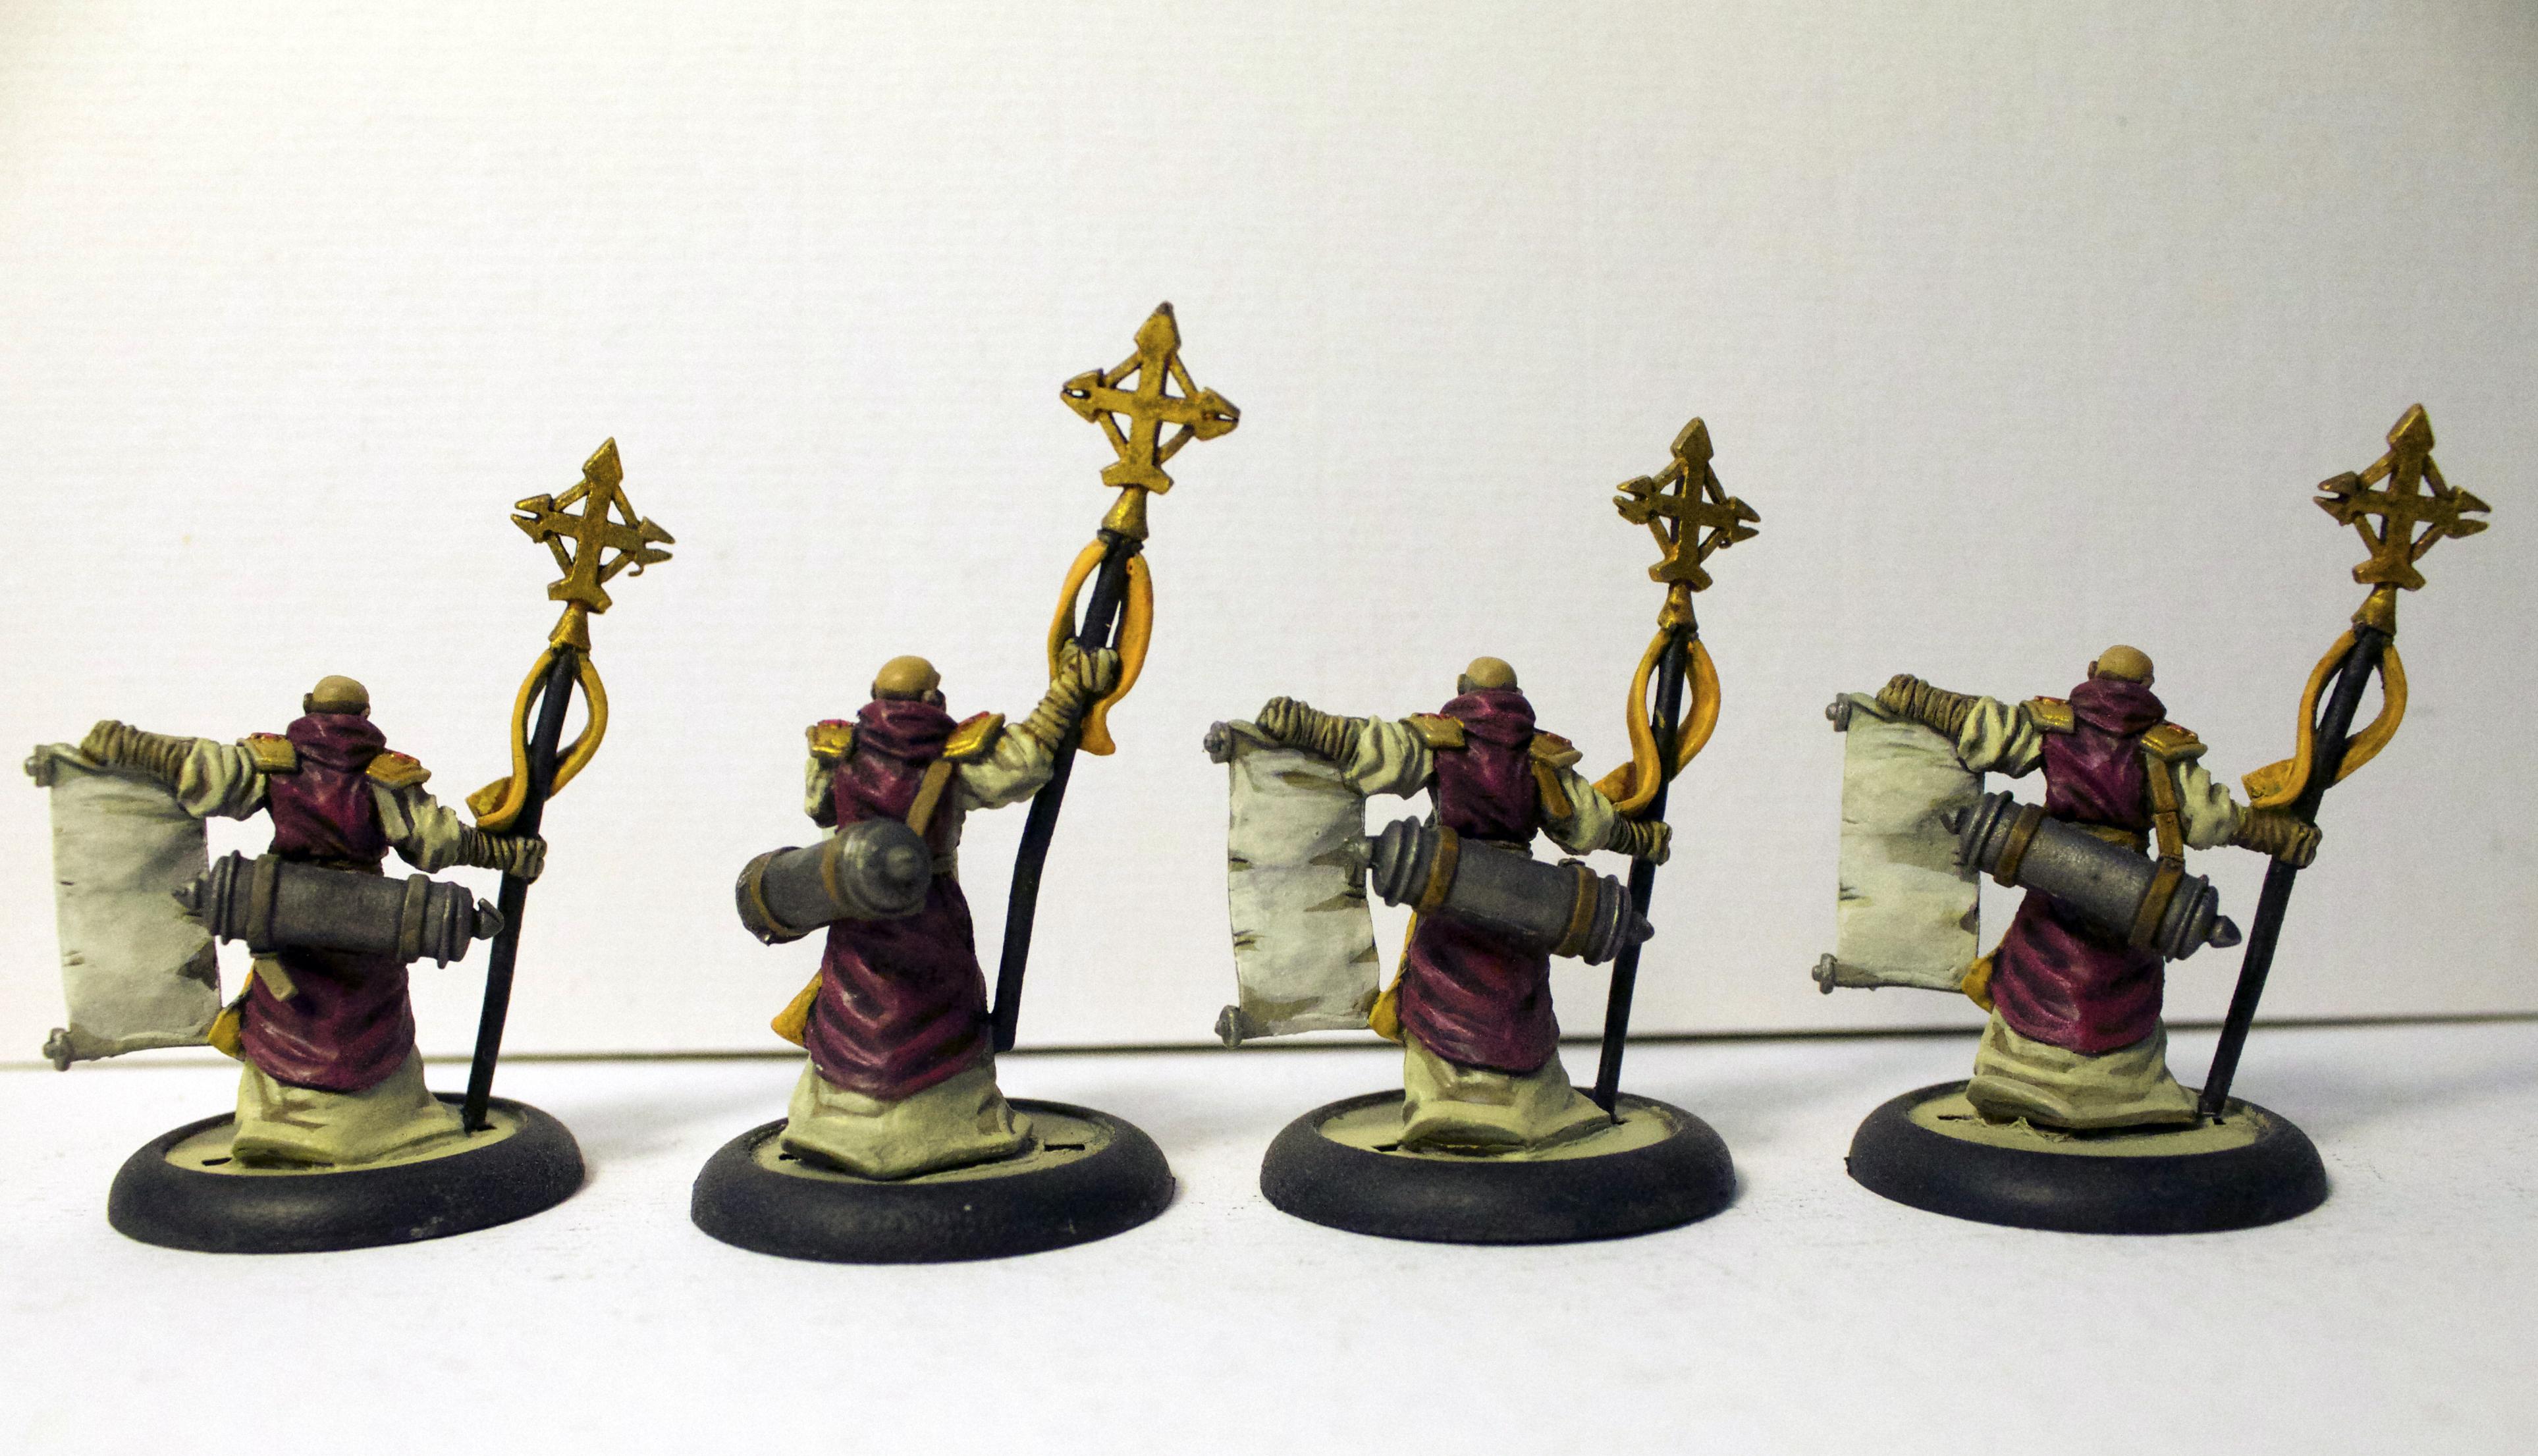 Armor, Commission, Fire, Gold, Protectorate Of Menoth, Robes, Tan, Warmachine, Weapon, White